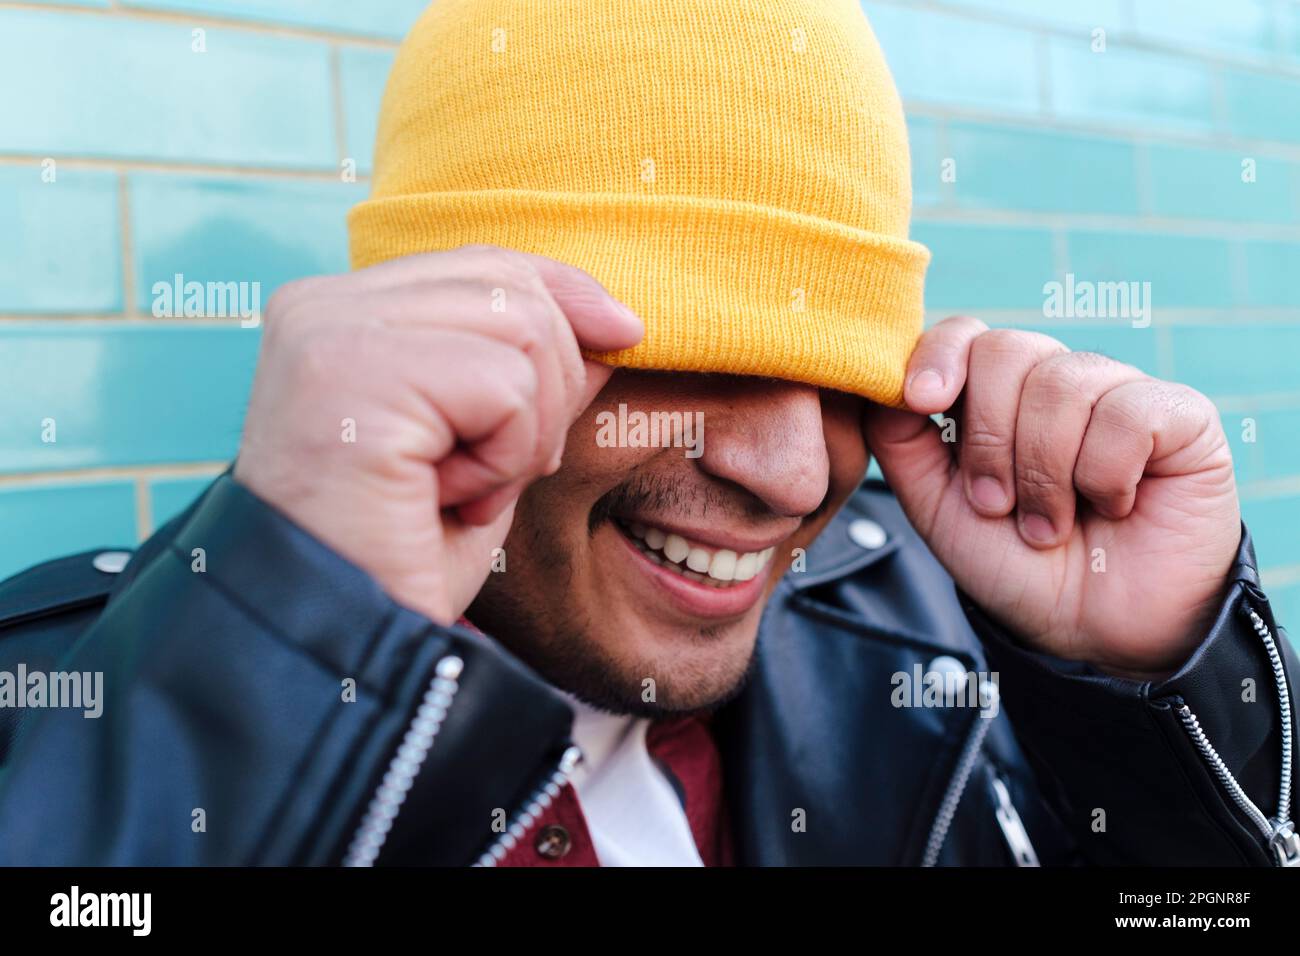 Smiling man covering face with yellow knit hat Stock Photo